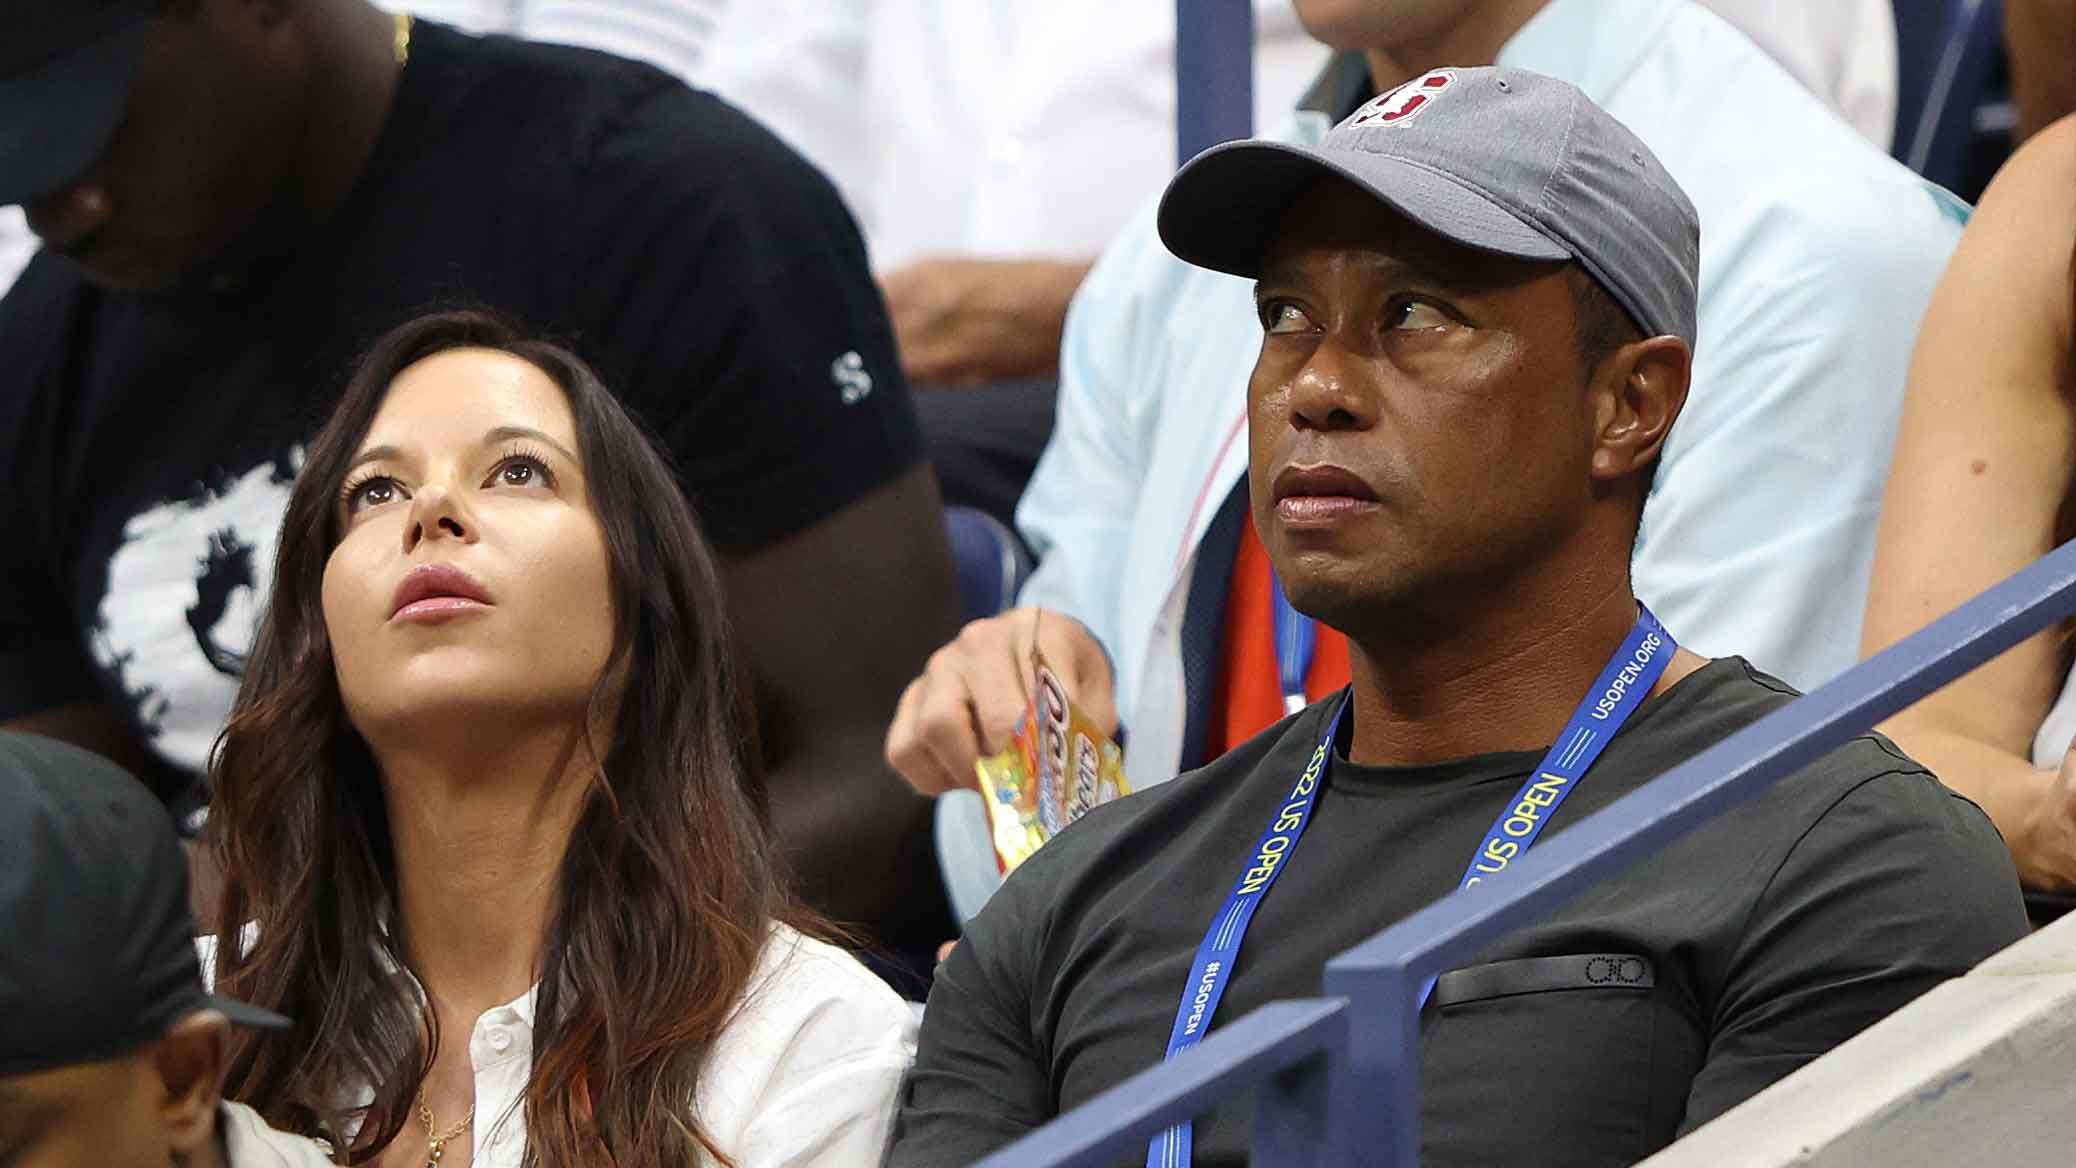 Tiger Woods Ex-Girlfriend Says He Used Lawyer to Break Up With